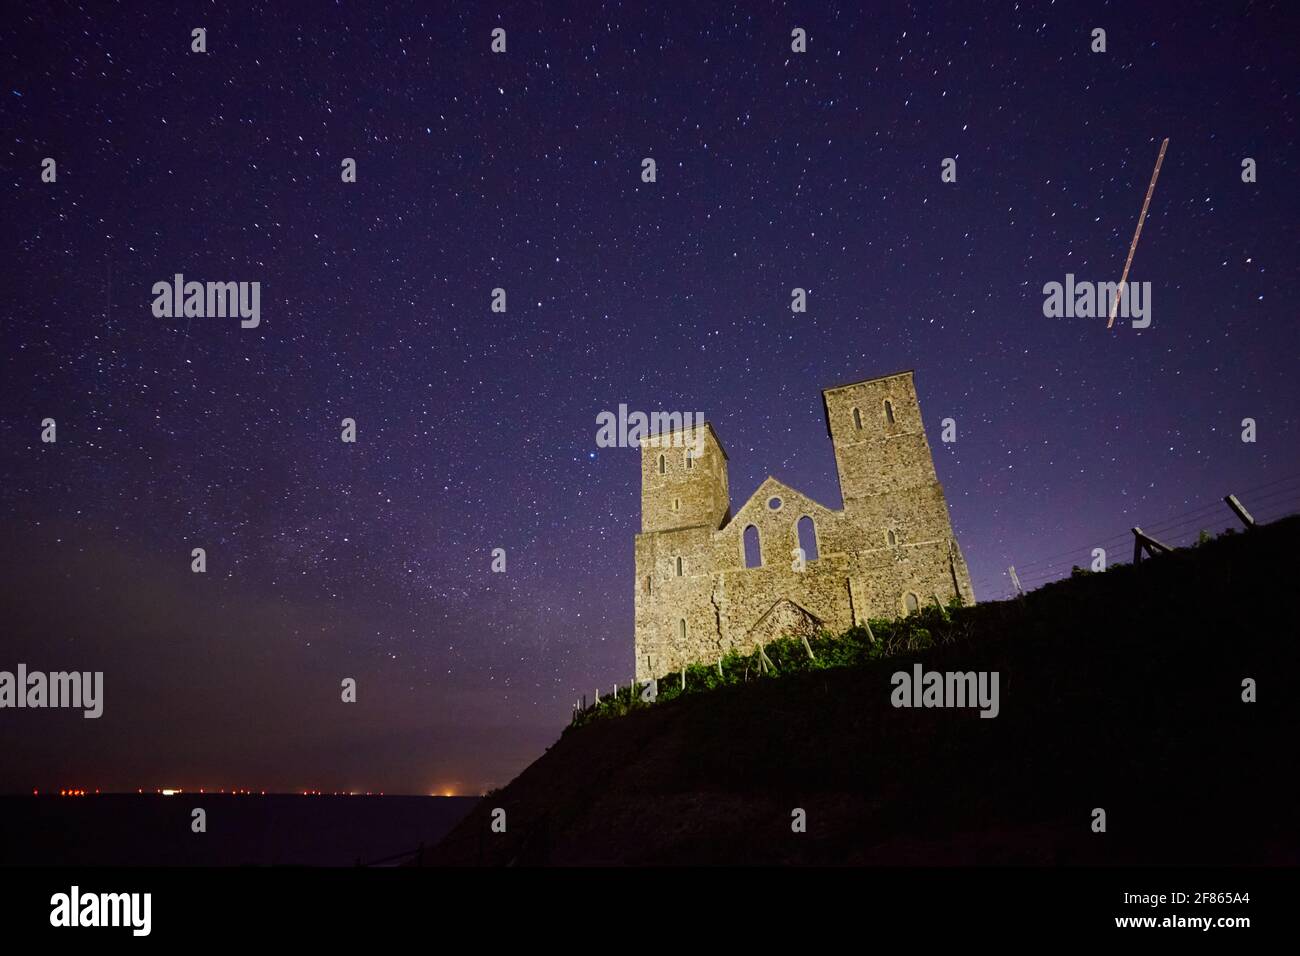 Reculver, Kent, UK. 12th April 2021: UK Weather. Clear skies with stars and a few clouds overnight of the 11th/12th April at the ruined church at Reculver, abandoned due to erosion by the sea in the early 19th century, its distinctive twin towers were saved as a navigation aid for ships. Wind farms and ships can be see on the horizon. A plane flies ovehead. Credit: Alan Payton/Alamy Live News Stock Photo